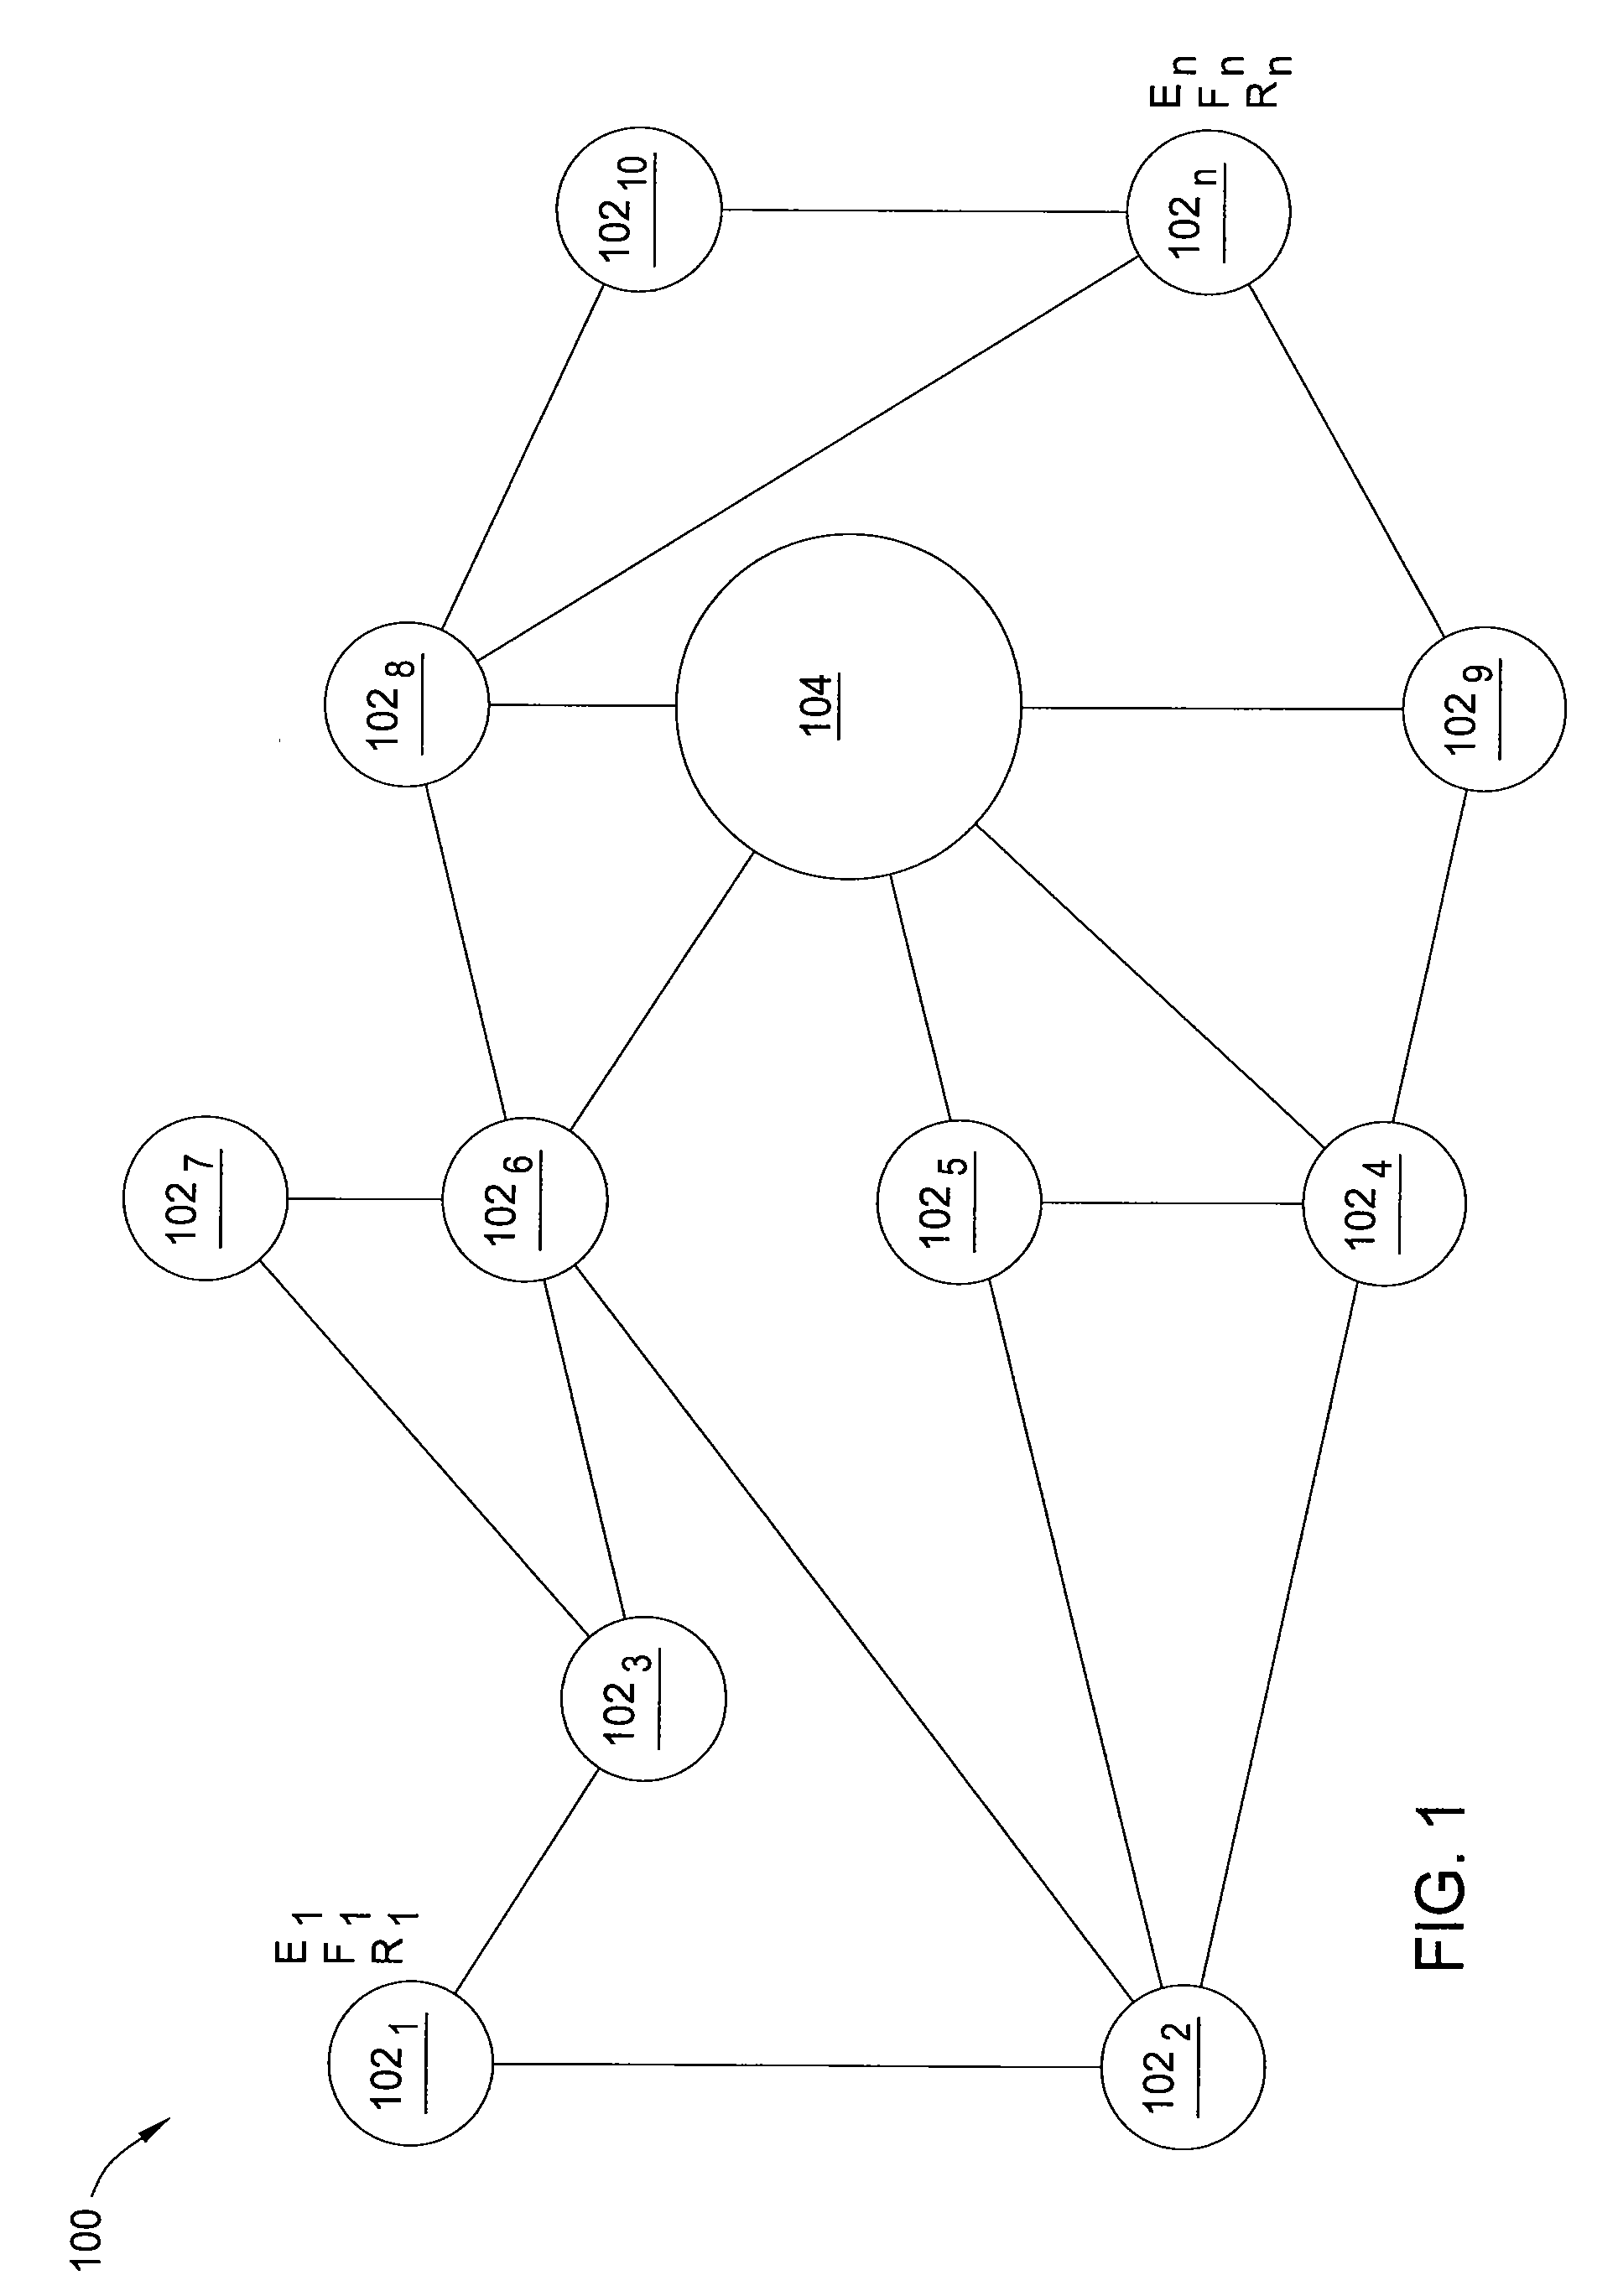 Method and apparatus for knowledge generation and deployment in a distributed network